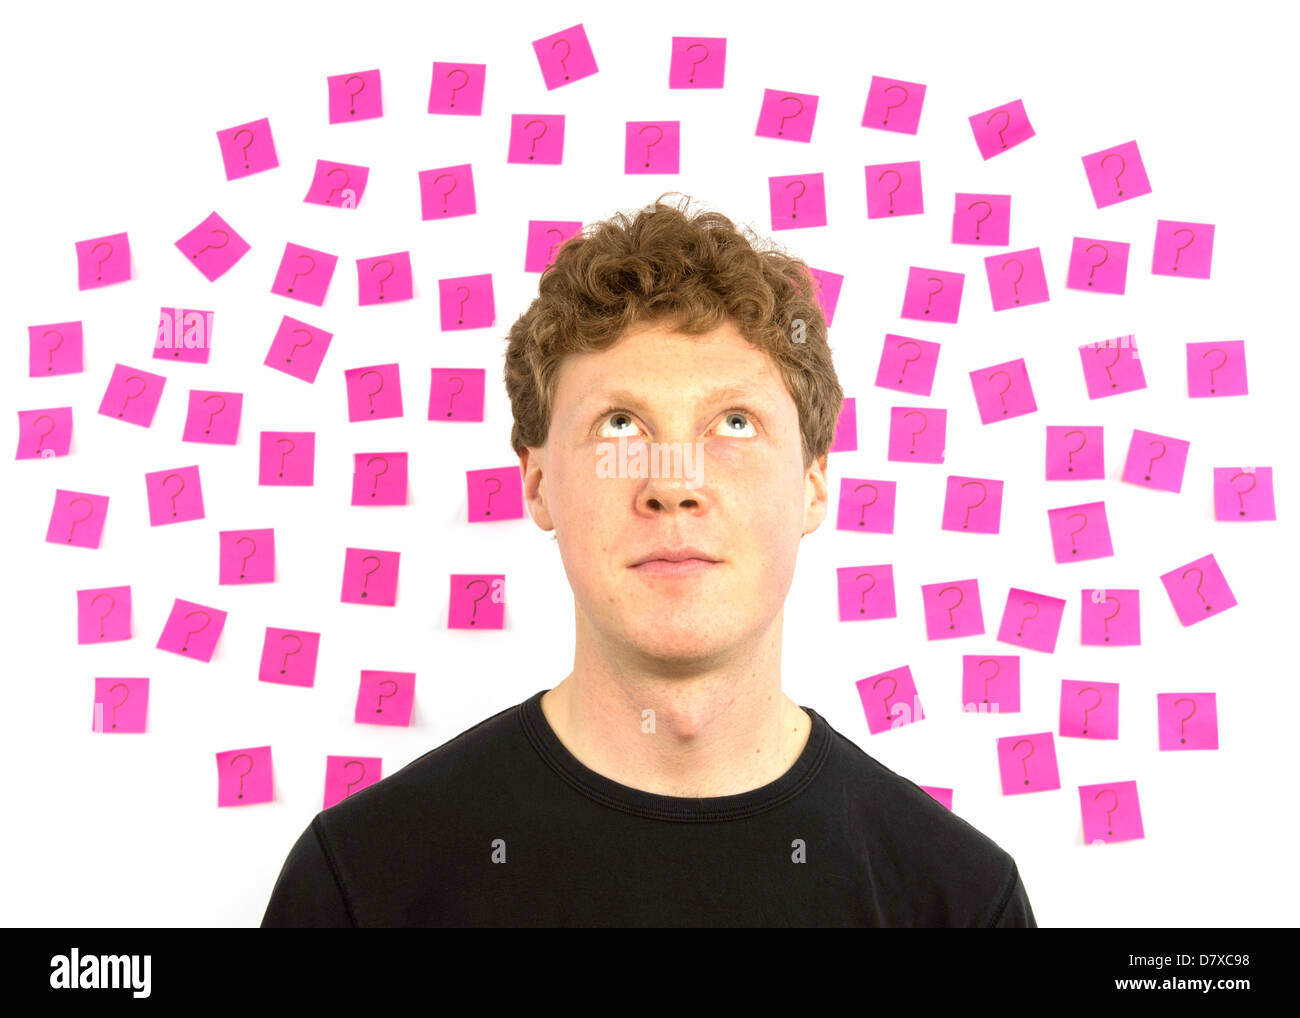 Young man with pink sticky notes and question marks thinking about decision making Stock Photo